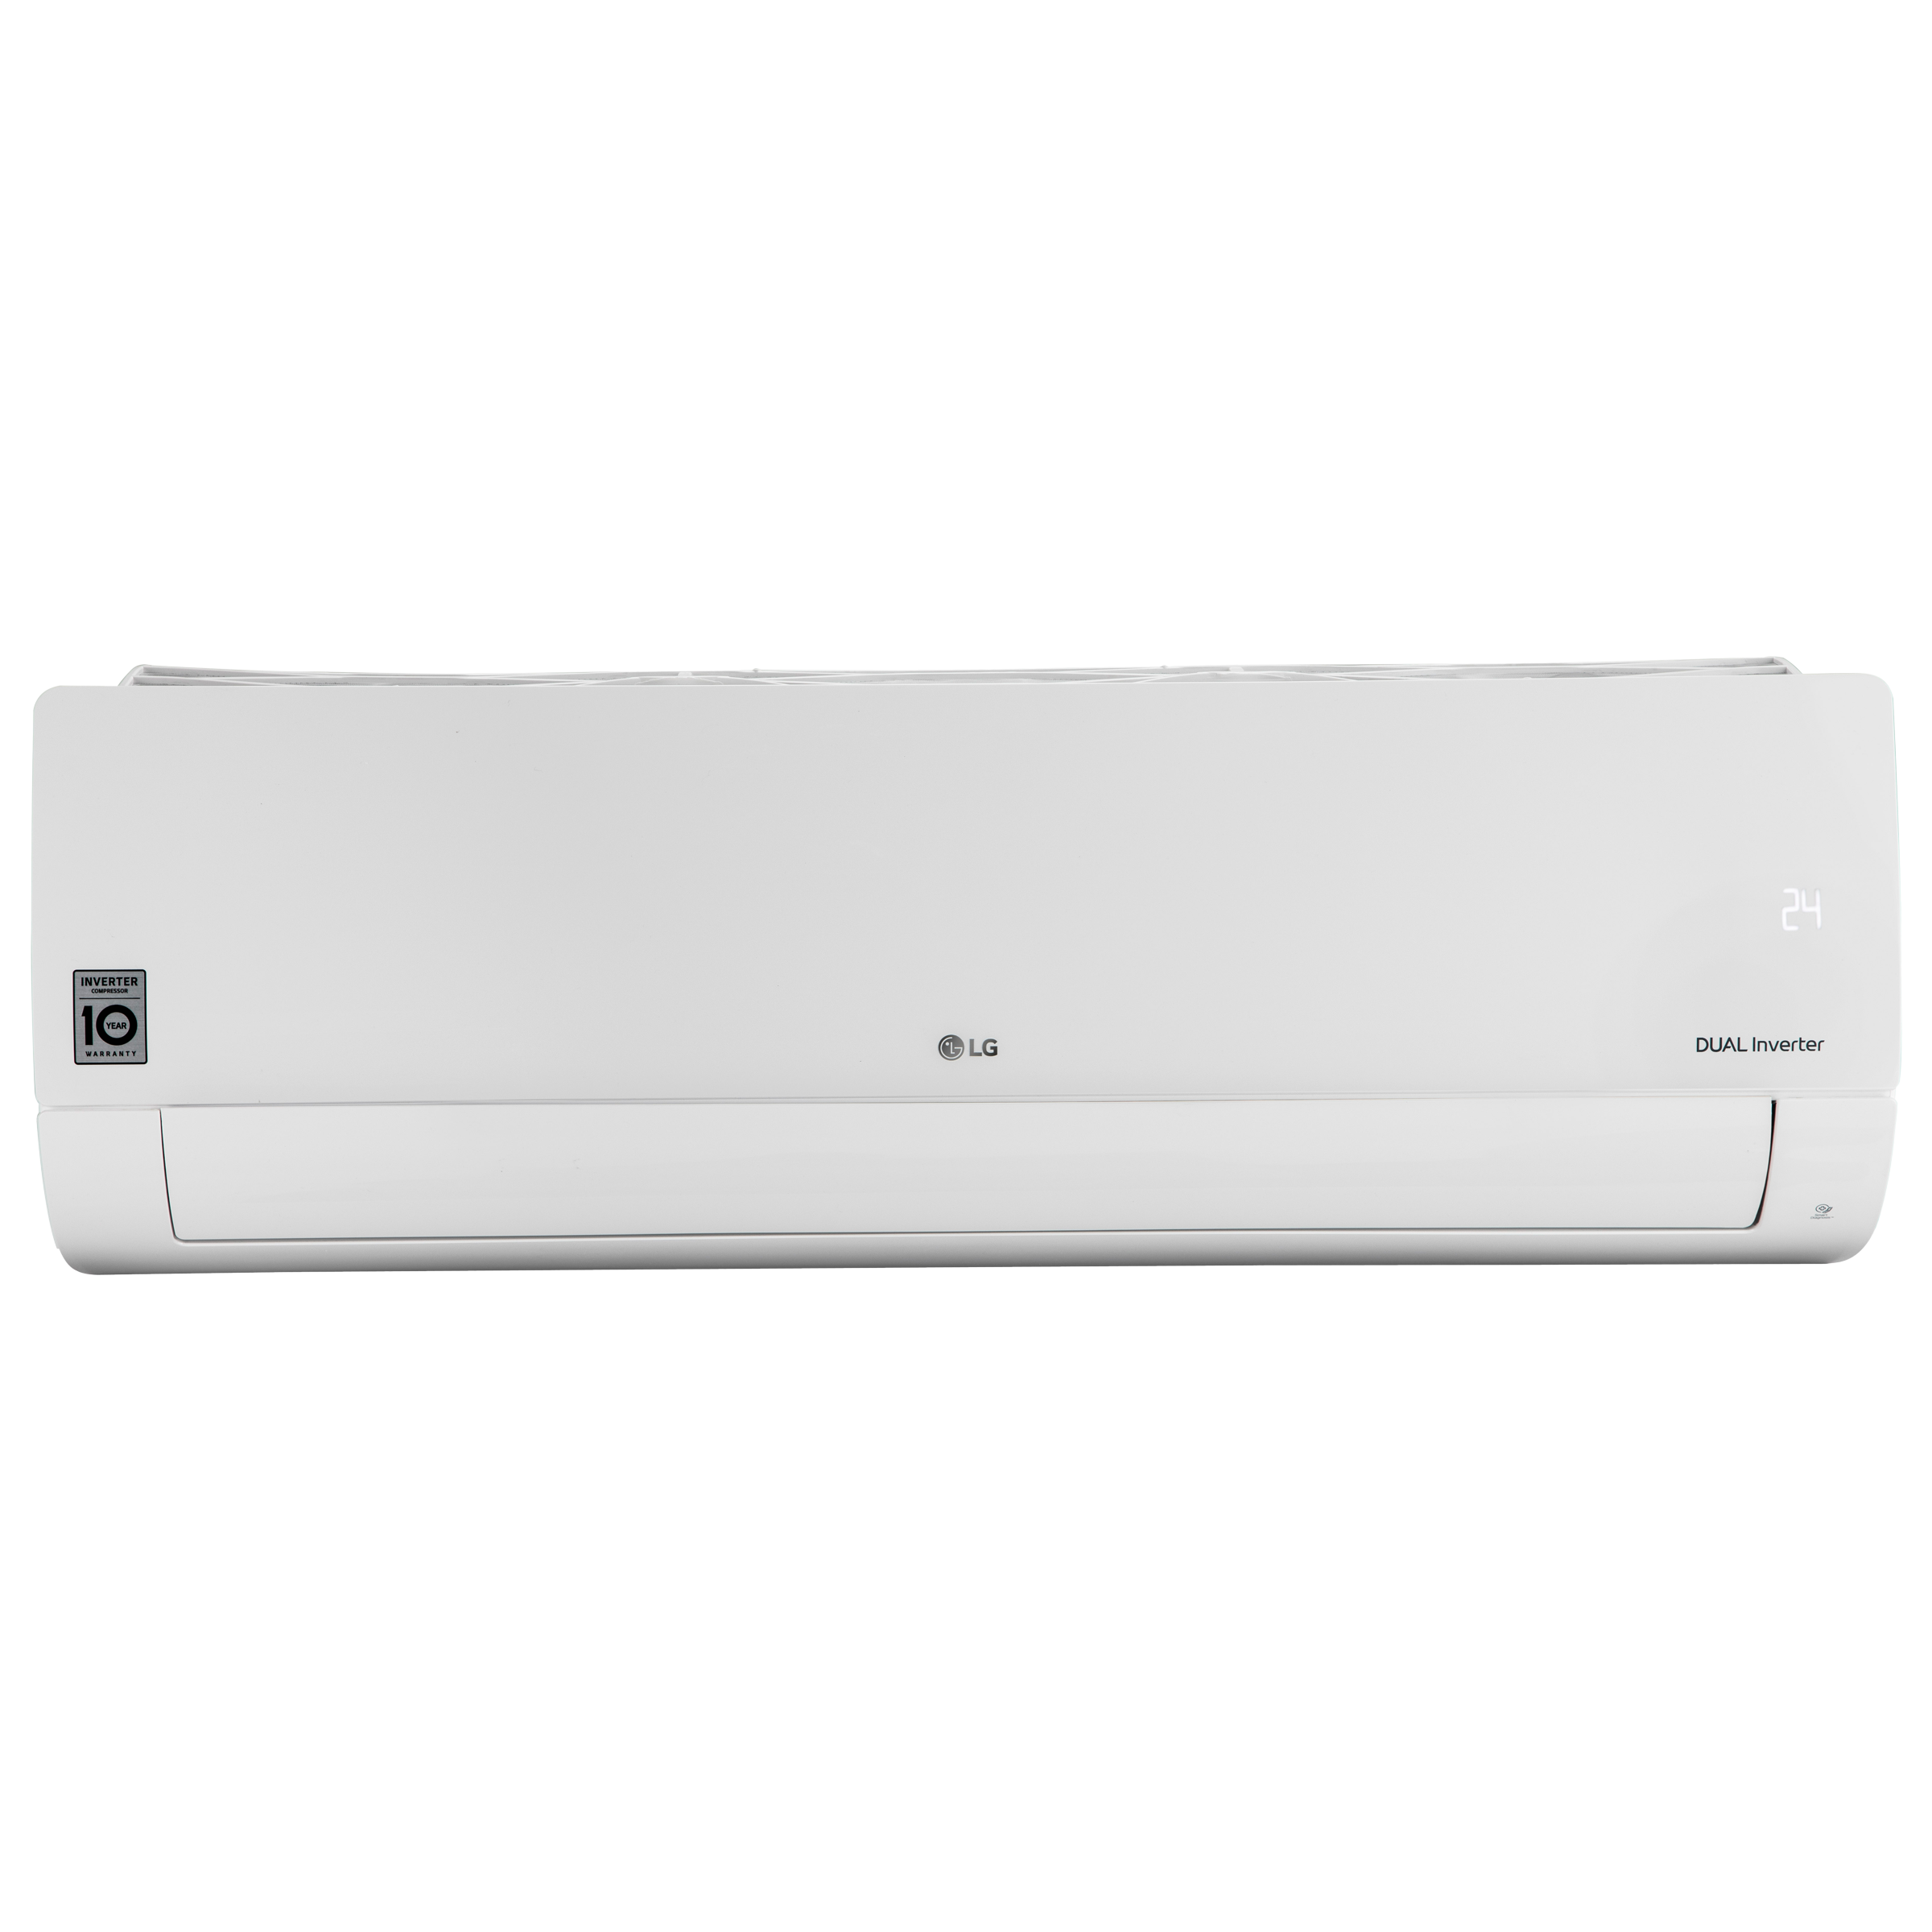 LG 6 in 1 Convertible 1 Ton 3 Star AI Dual Inverter Split AC with Auto Clean (Copper Condenser, RS-Q12BNXE.AMLG)_1